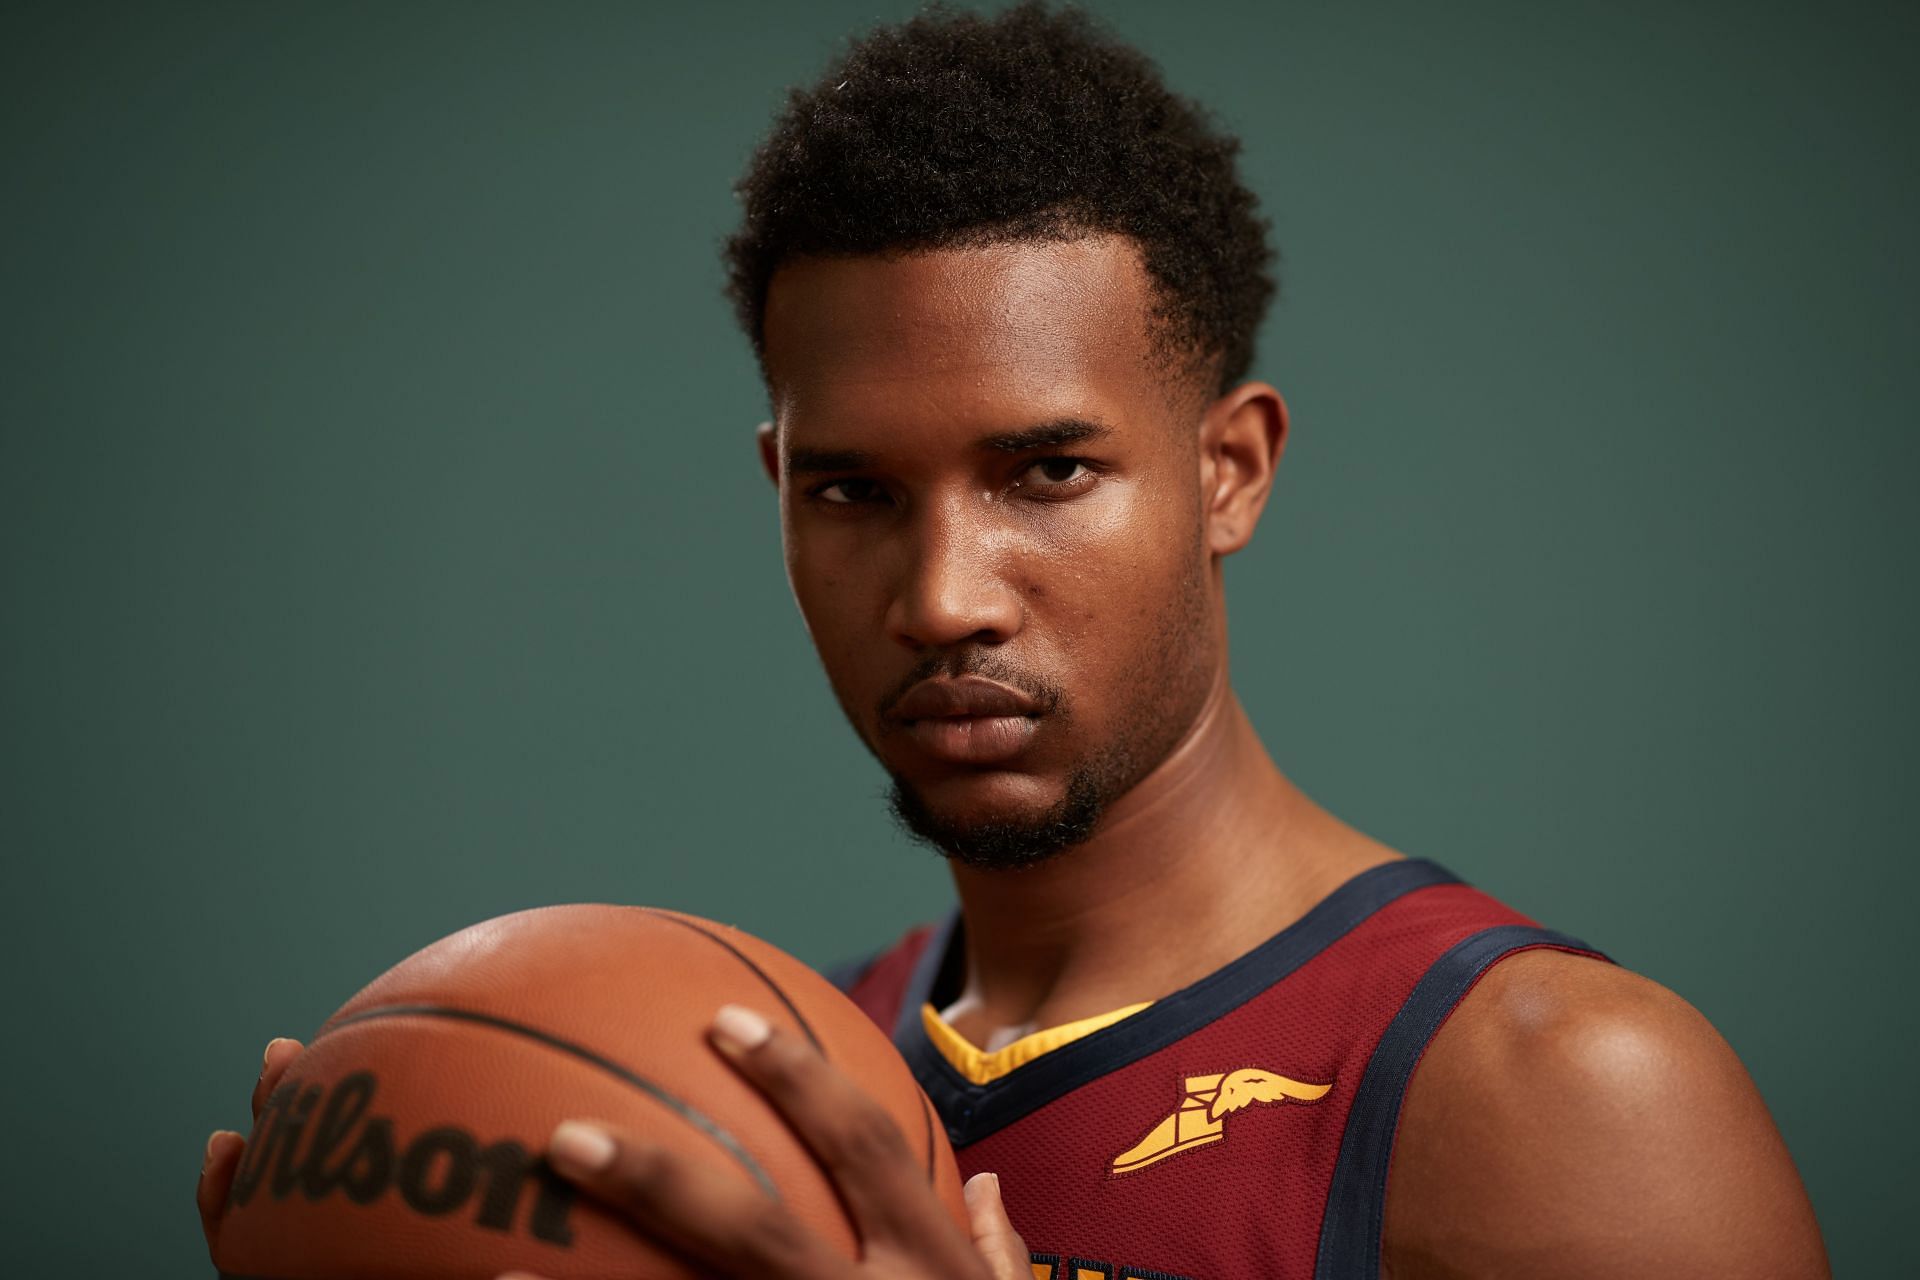 Evan Mobley #4 of the Clevland Cavaliers poses for a photo during the 2021 NBA Rookie Photo Shoot on August 15, 2021 in Las Vegas, Nevada.